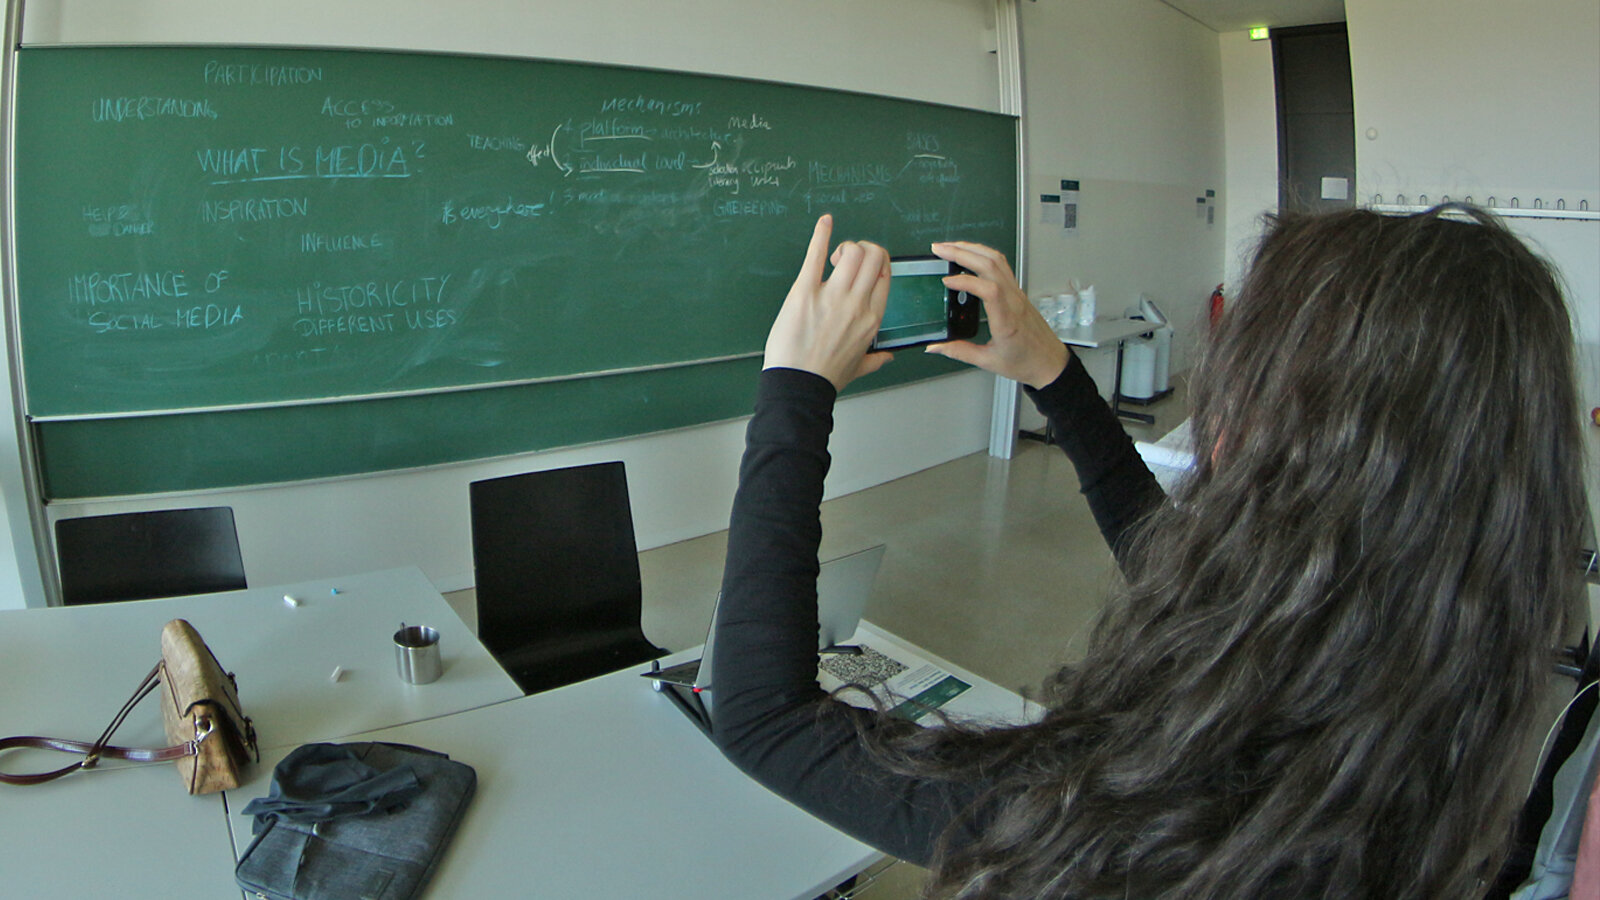 A young woman takes a picture of a blackboard with her cell phone.